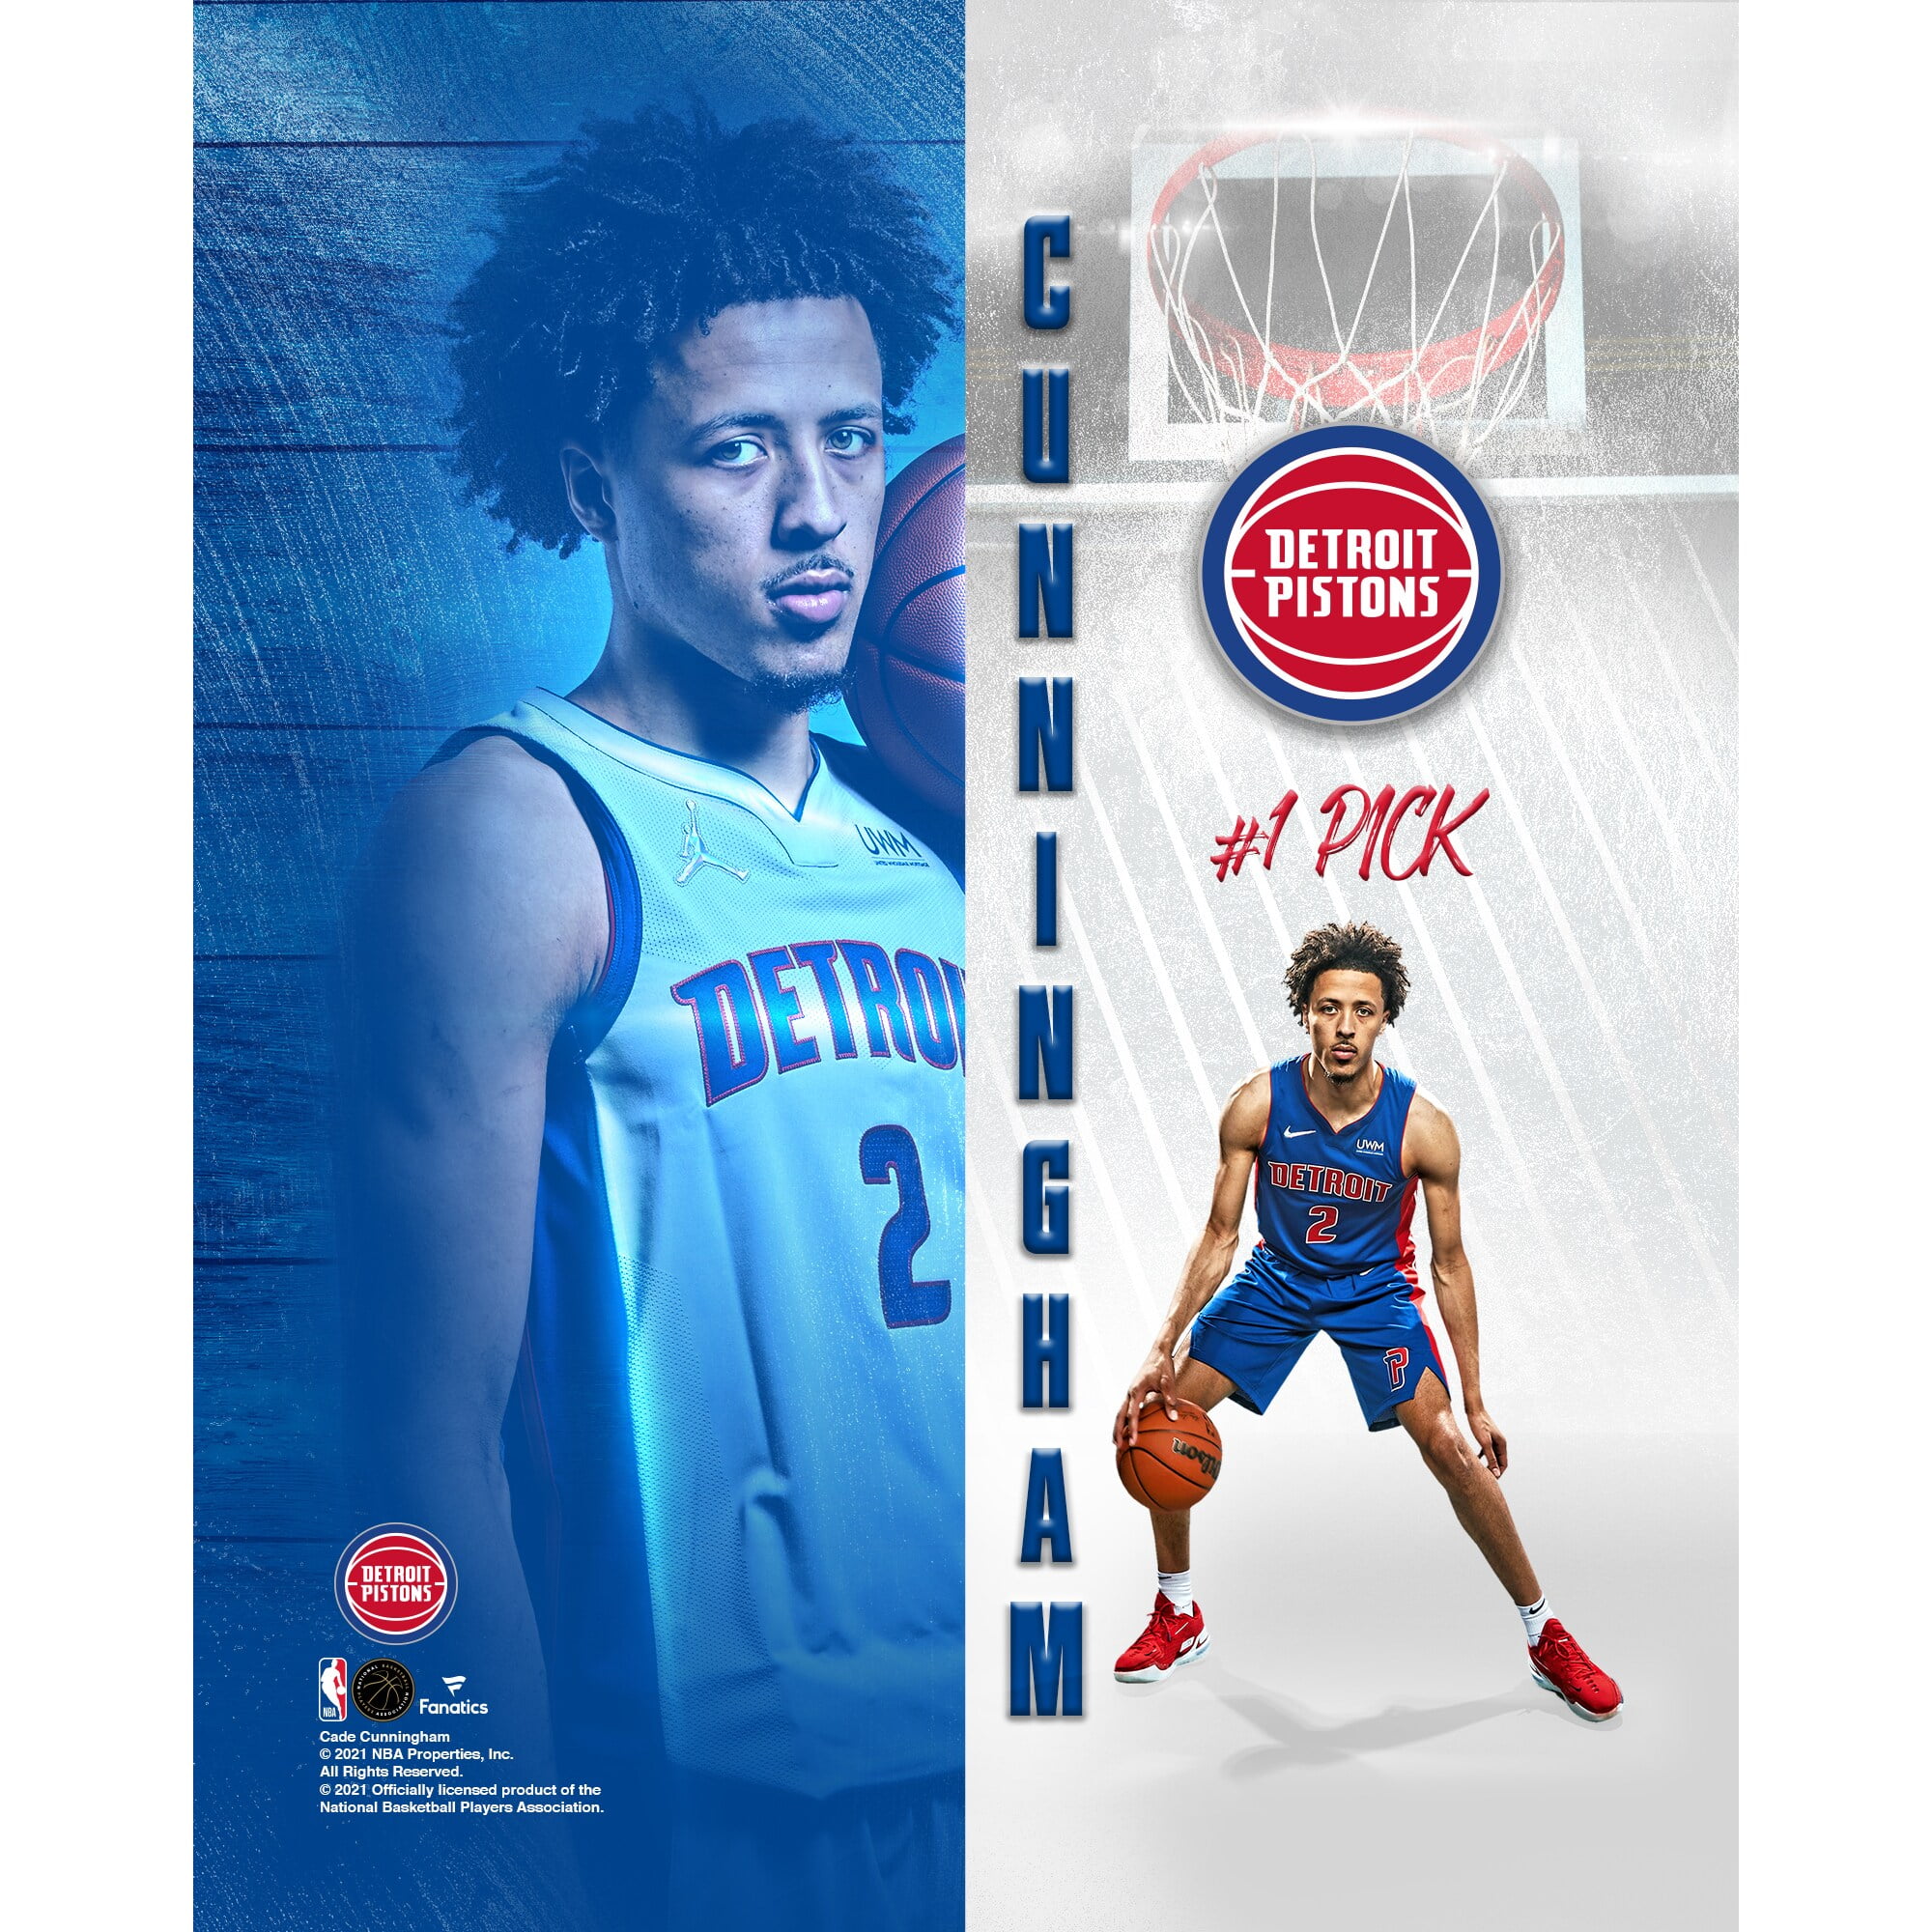 Cade Cunningham Weighs In On Teal Detroit Pistons Uniforms - All